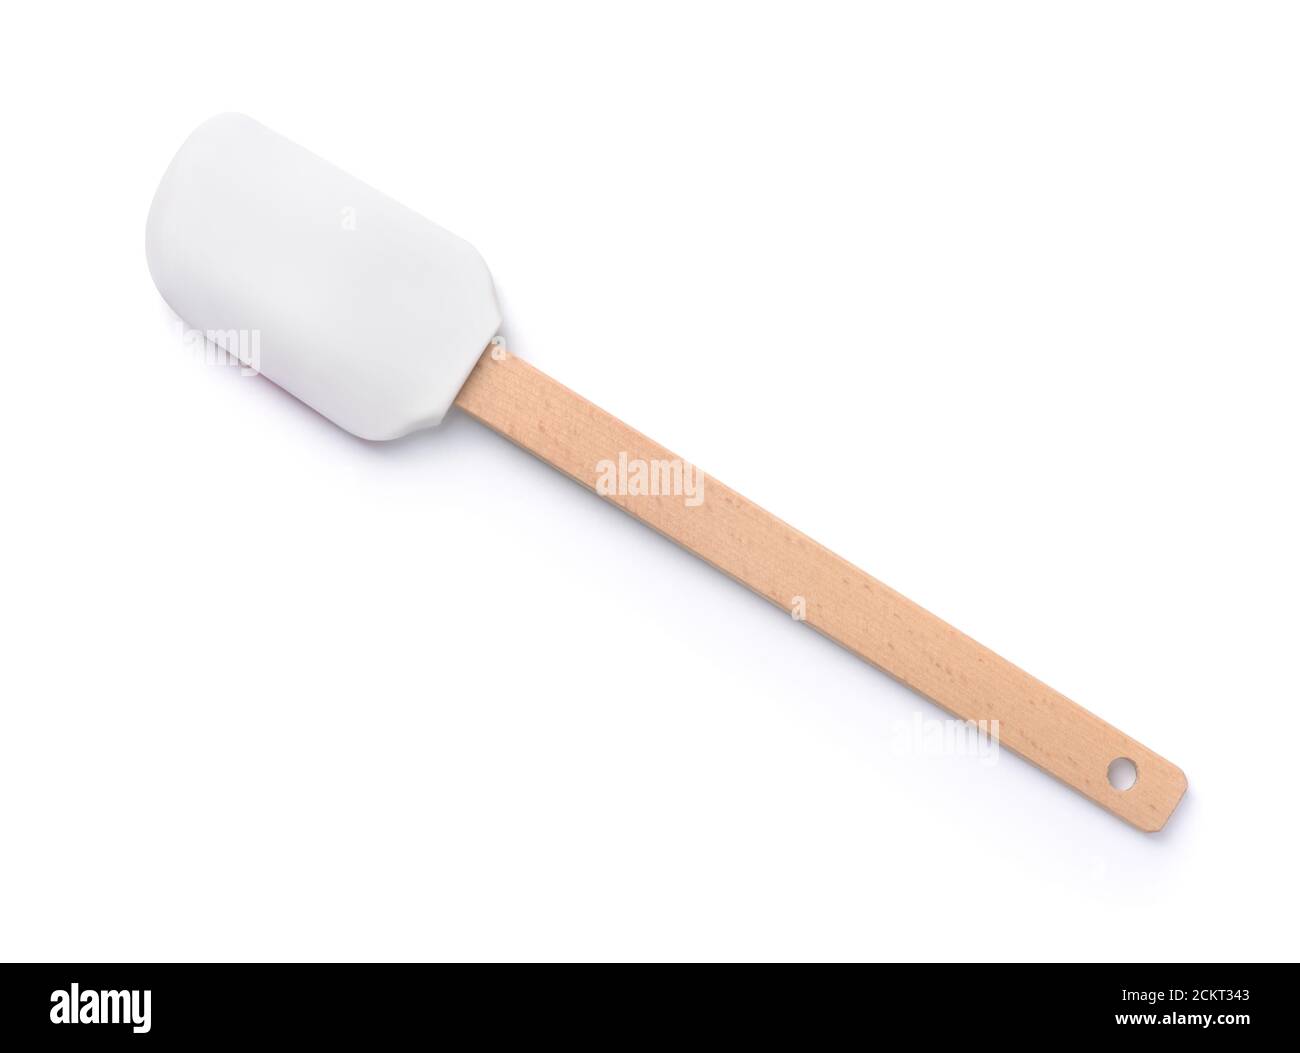 https://c8.alamy.com/comp/2CKT343/top-view-of-silicone-kitchen-spatula-with-wooden-handle-isolated-on-white-2CKT343.jpg